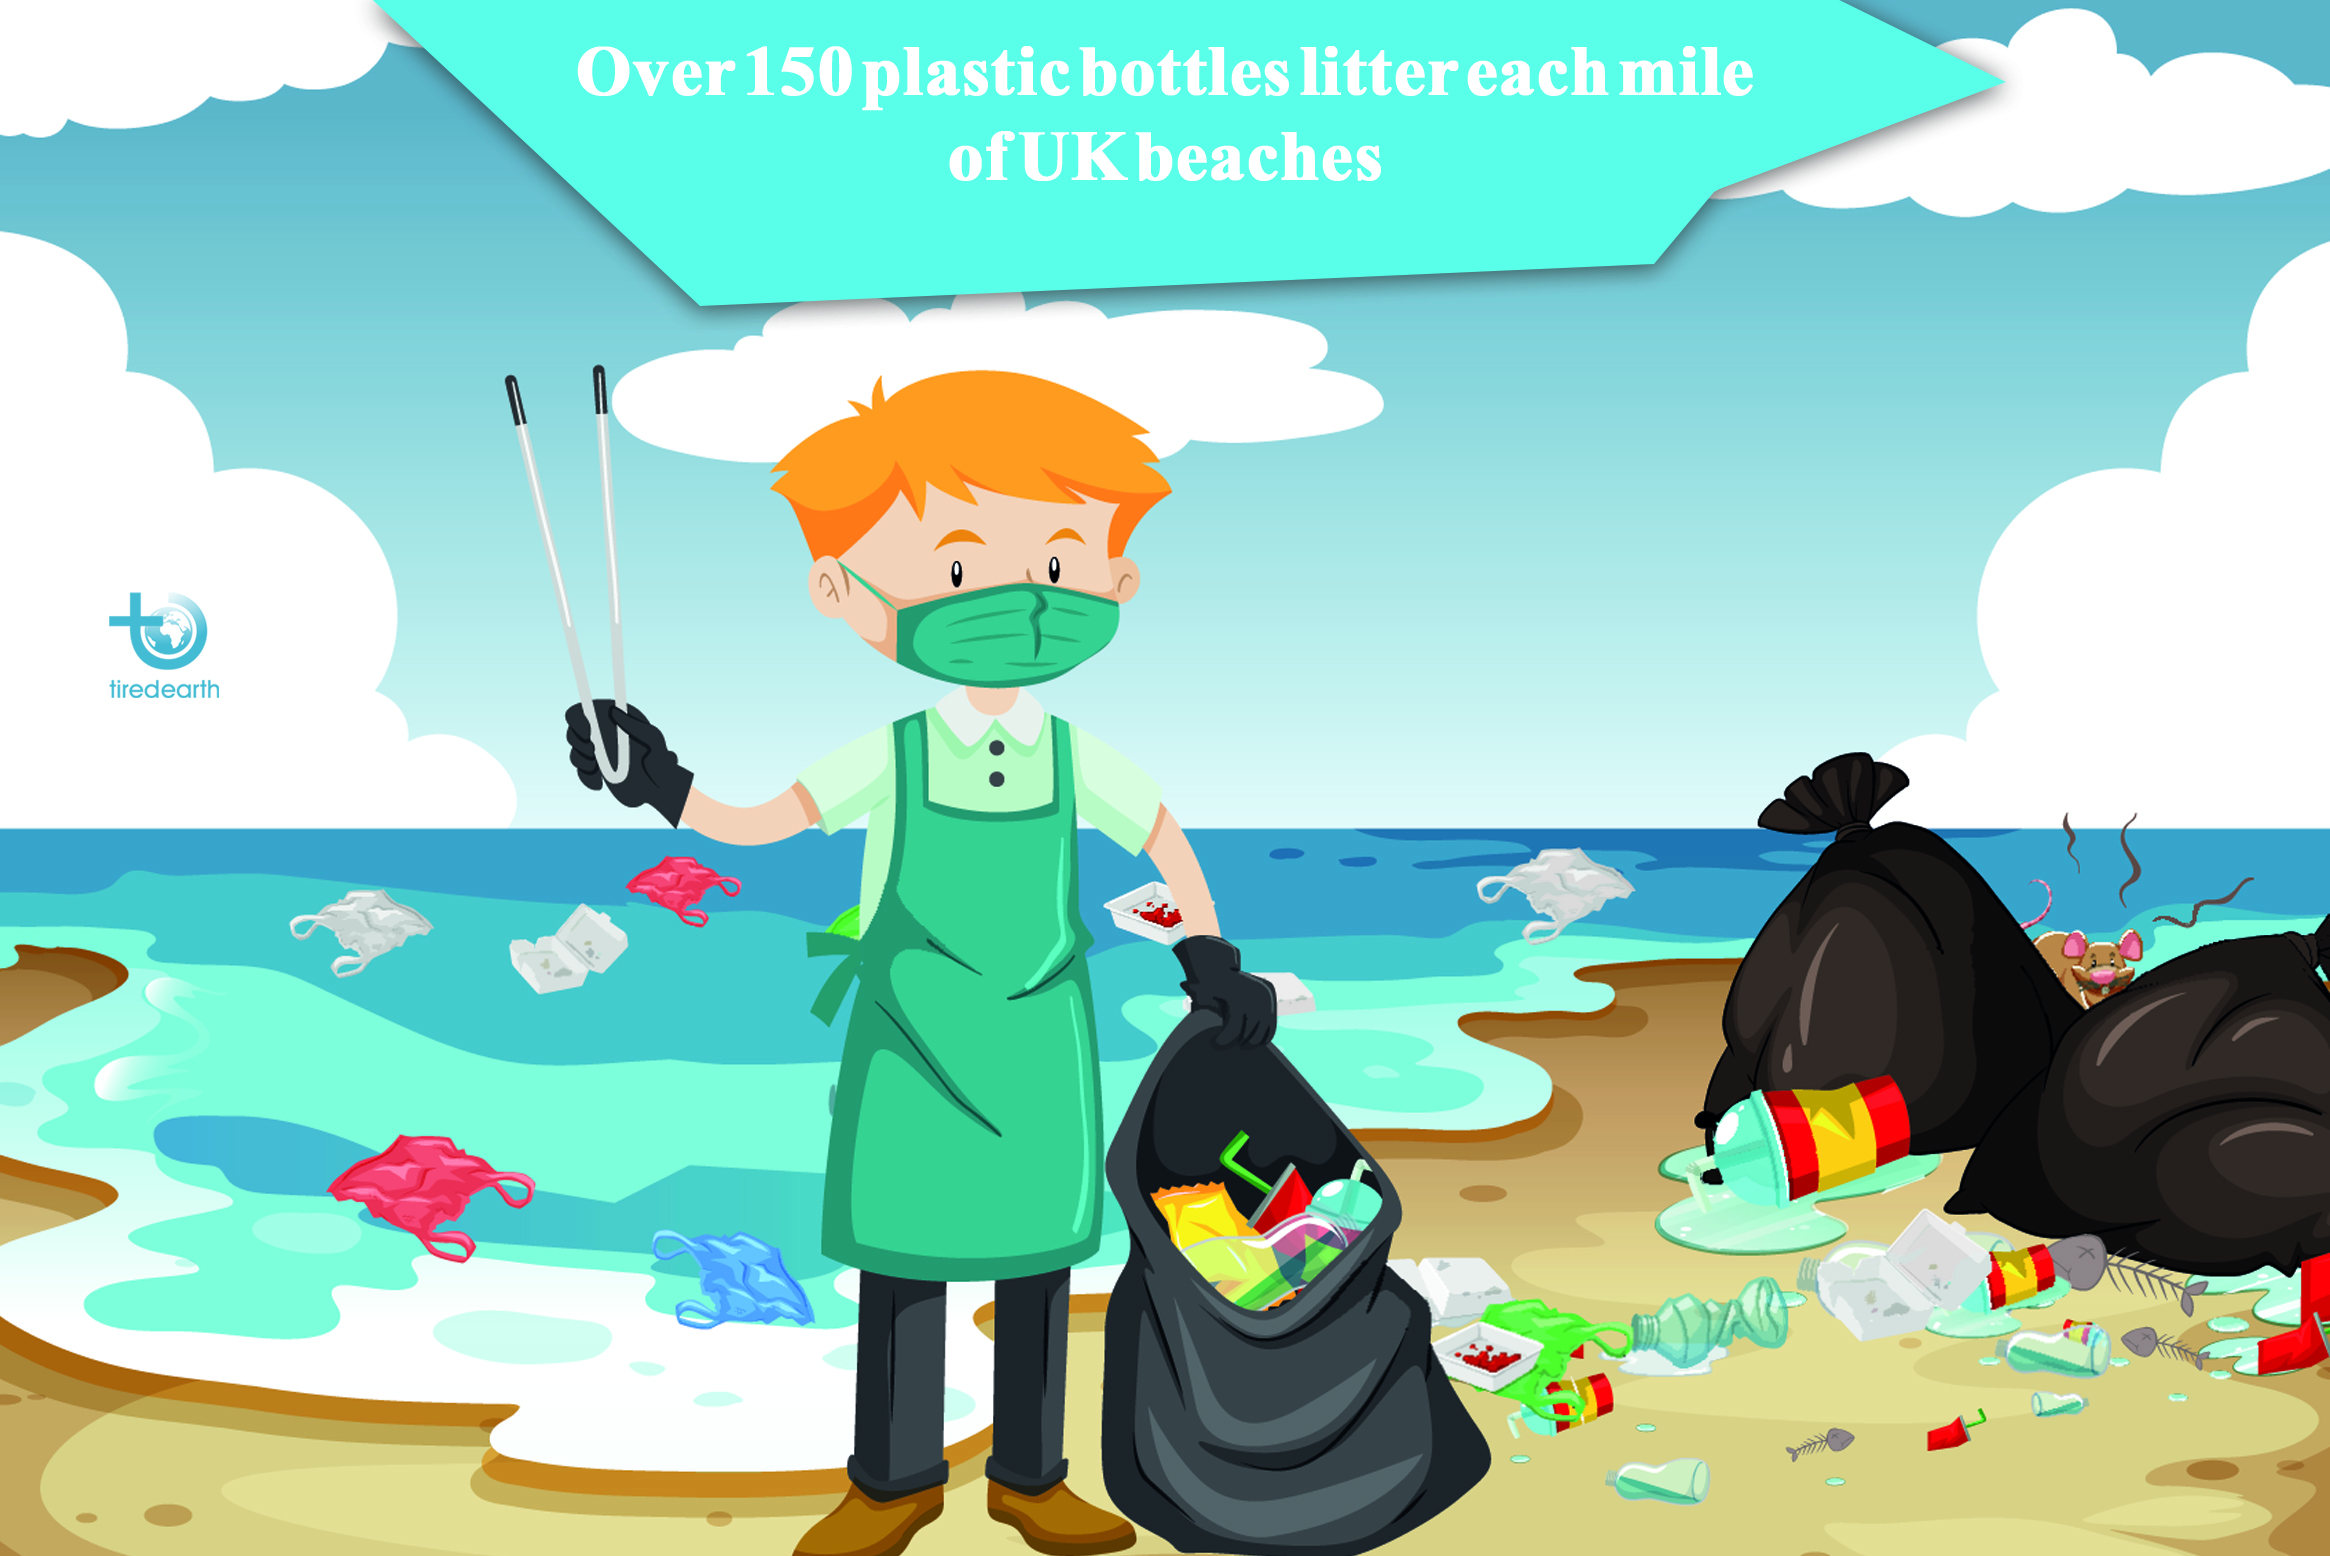 Let’s Celebrate Coastal Cleanup Day by Cleaning the Beaches